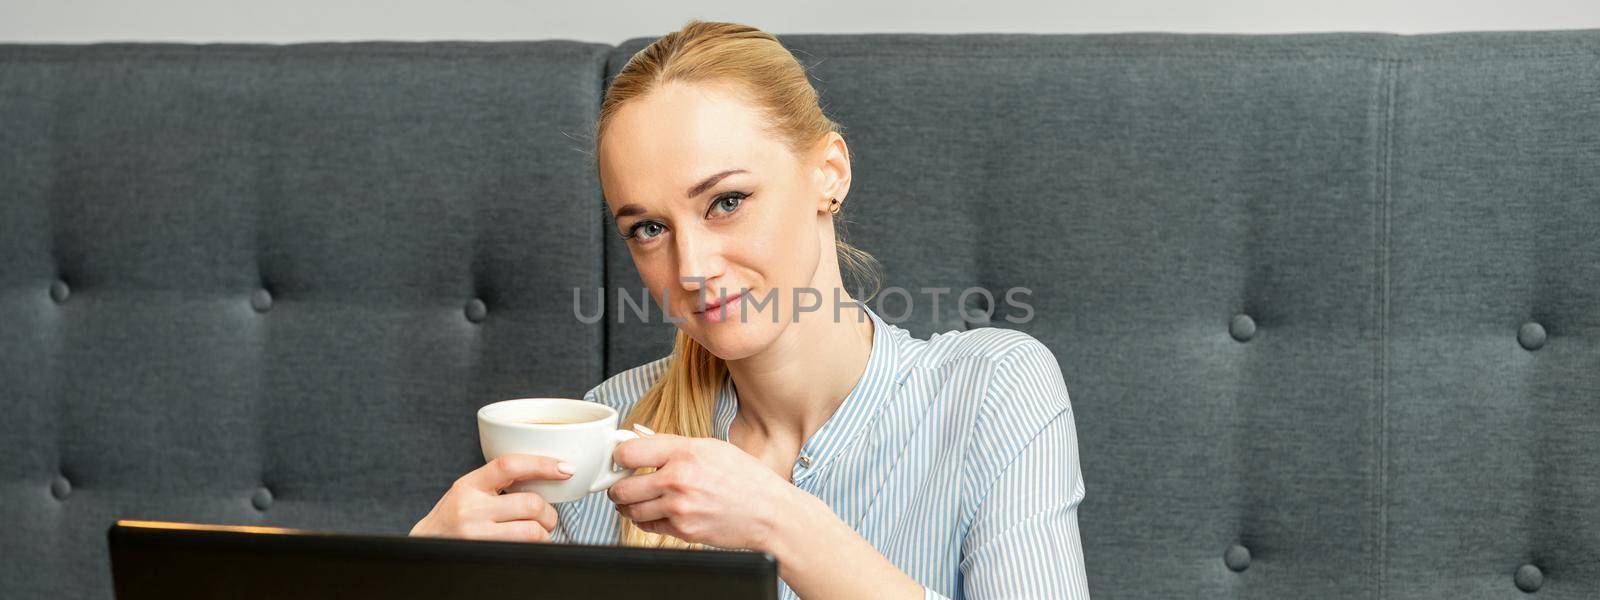 Portrait of a young businesswoman using laptop sitting at the table with a cup of coffee in a cafe